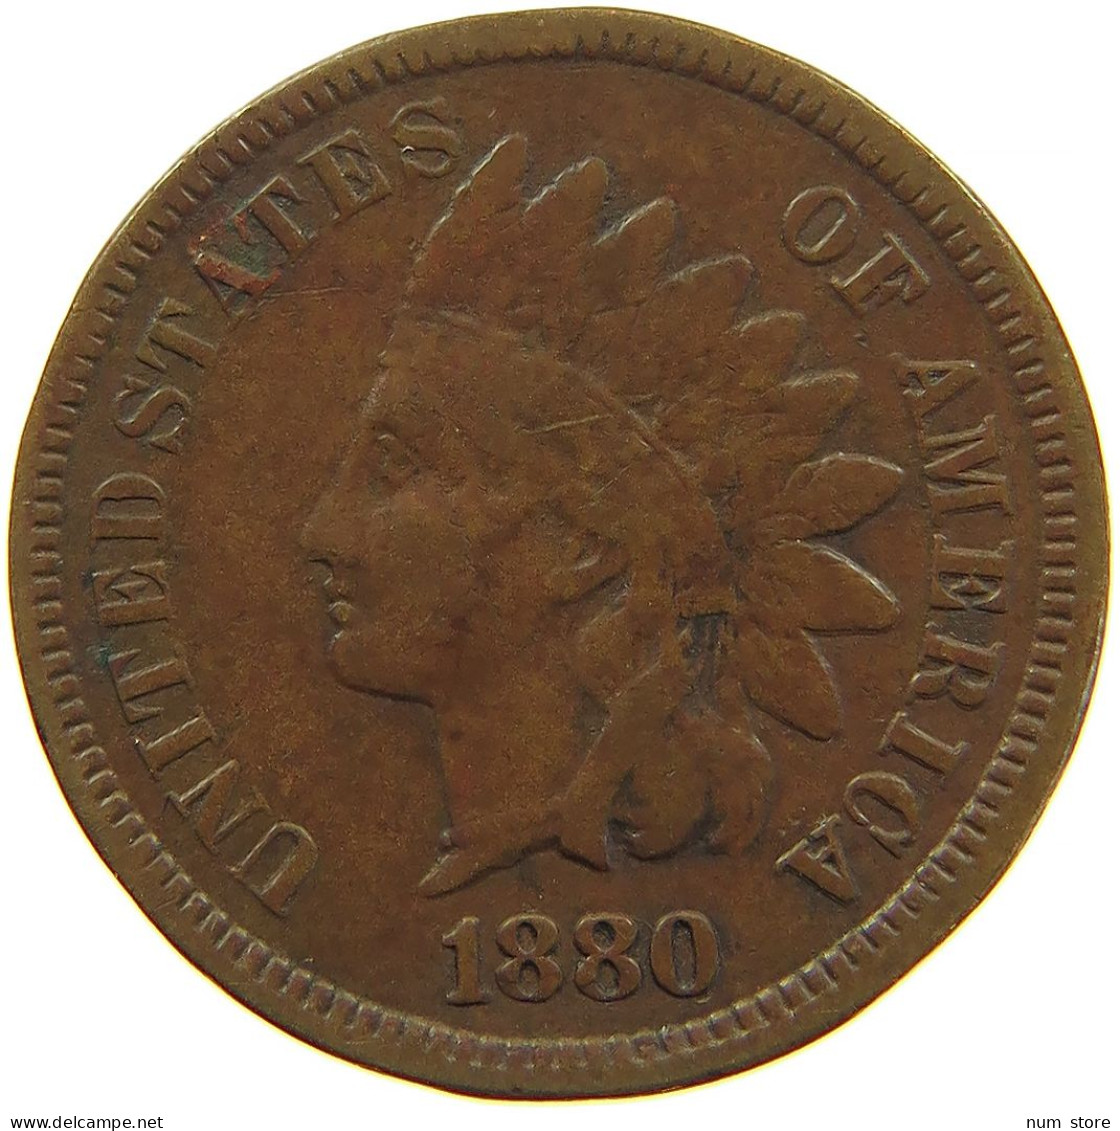 UNITED STATES OF AMERICA CENT 1880 INDIAN HEAD #s091 0399 - 1859-1909: Indian Head